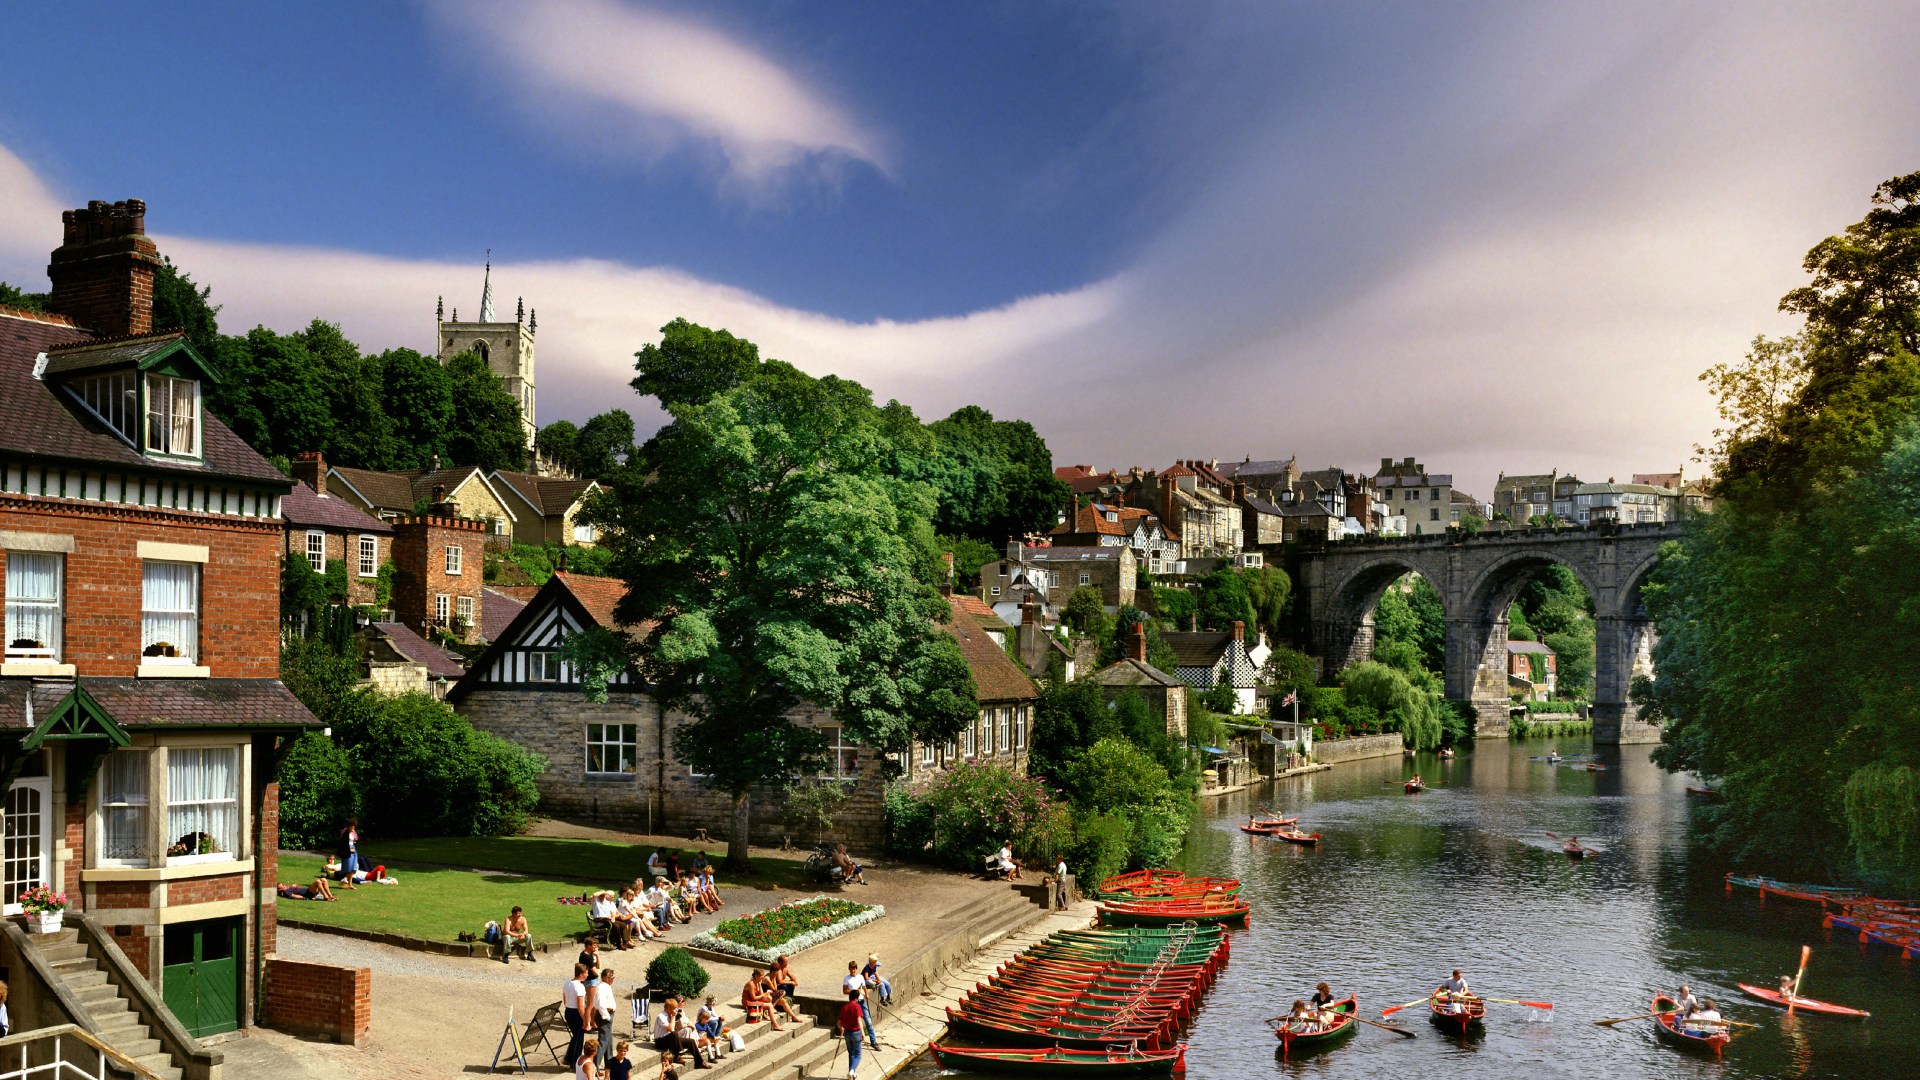 Discover the Stunning Views of England’s Prettiest Town at this 173-Year-Old UK Attraction!